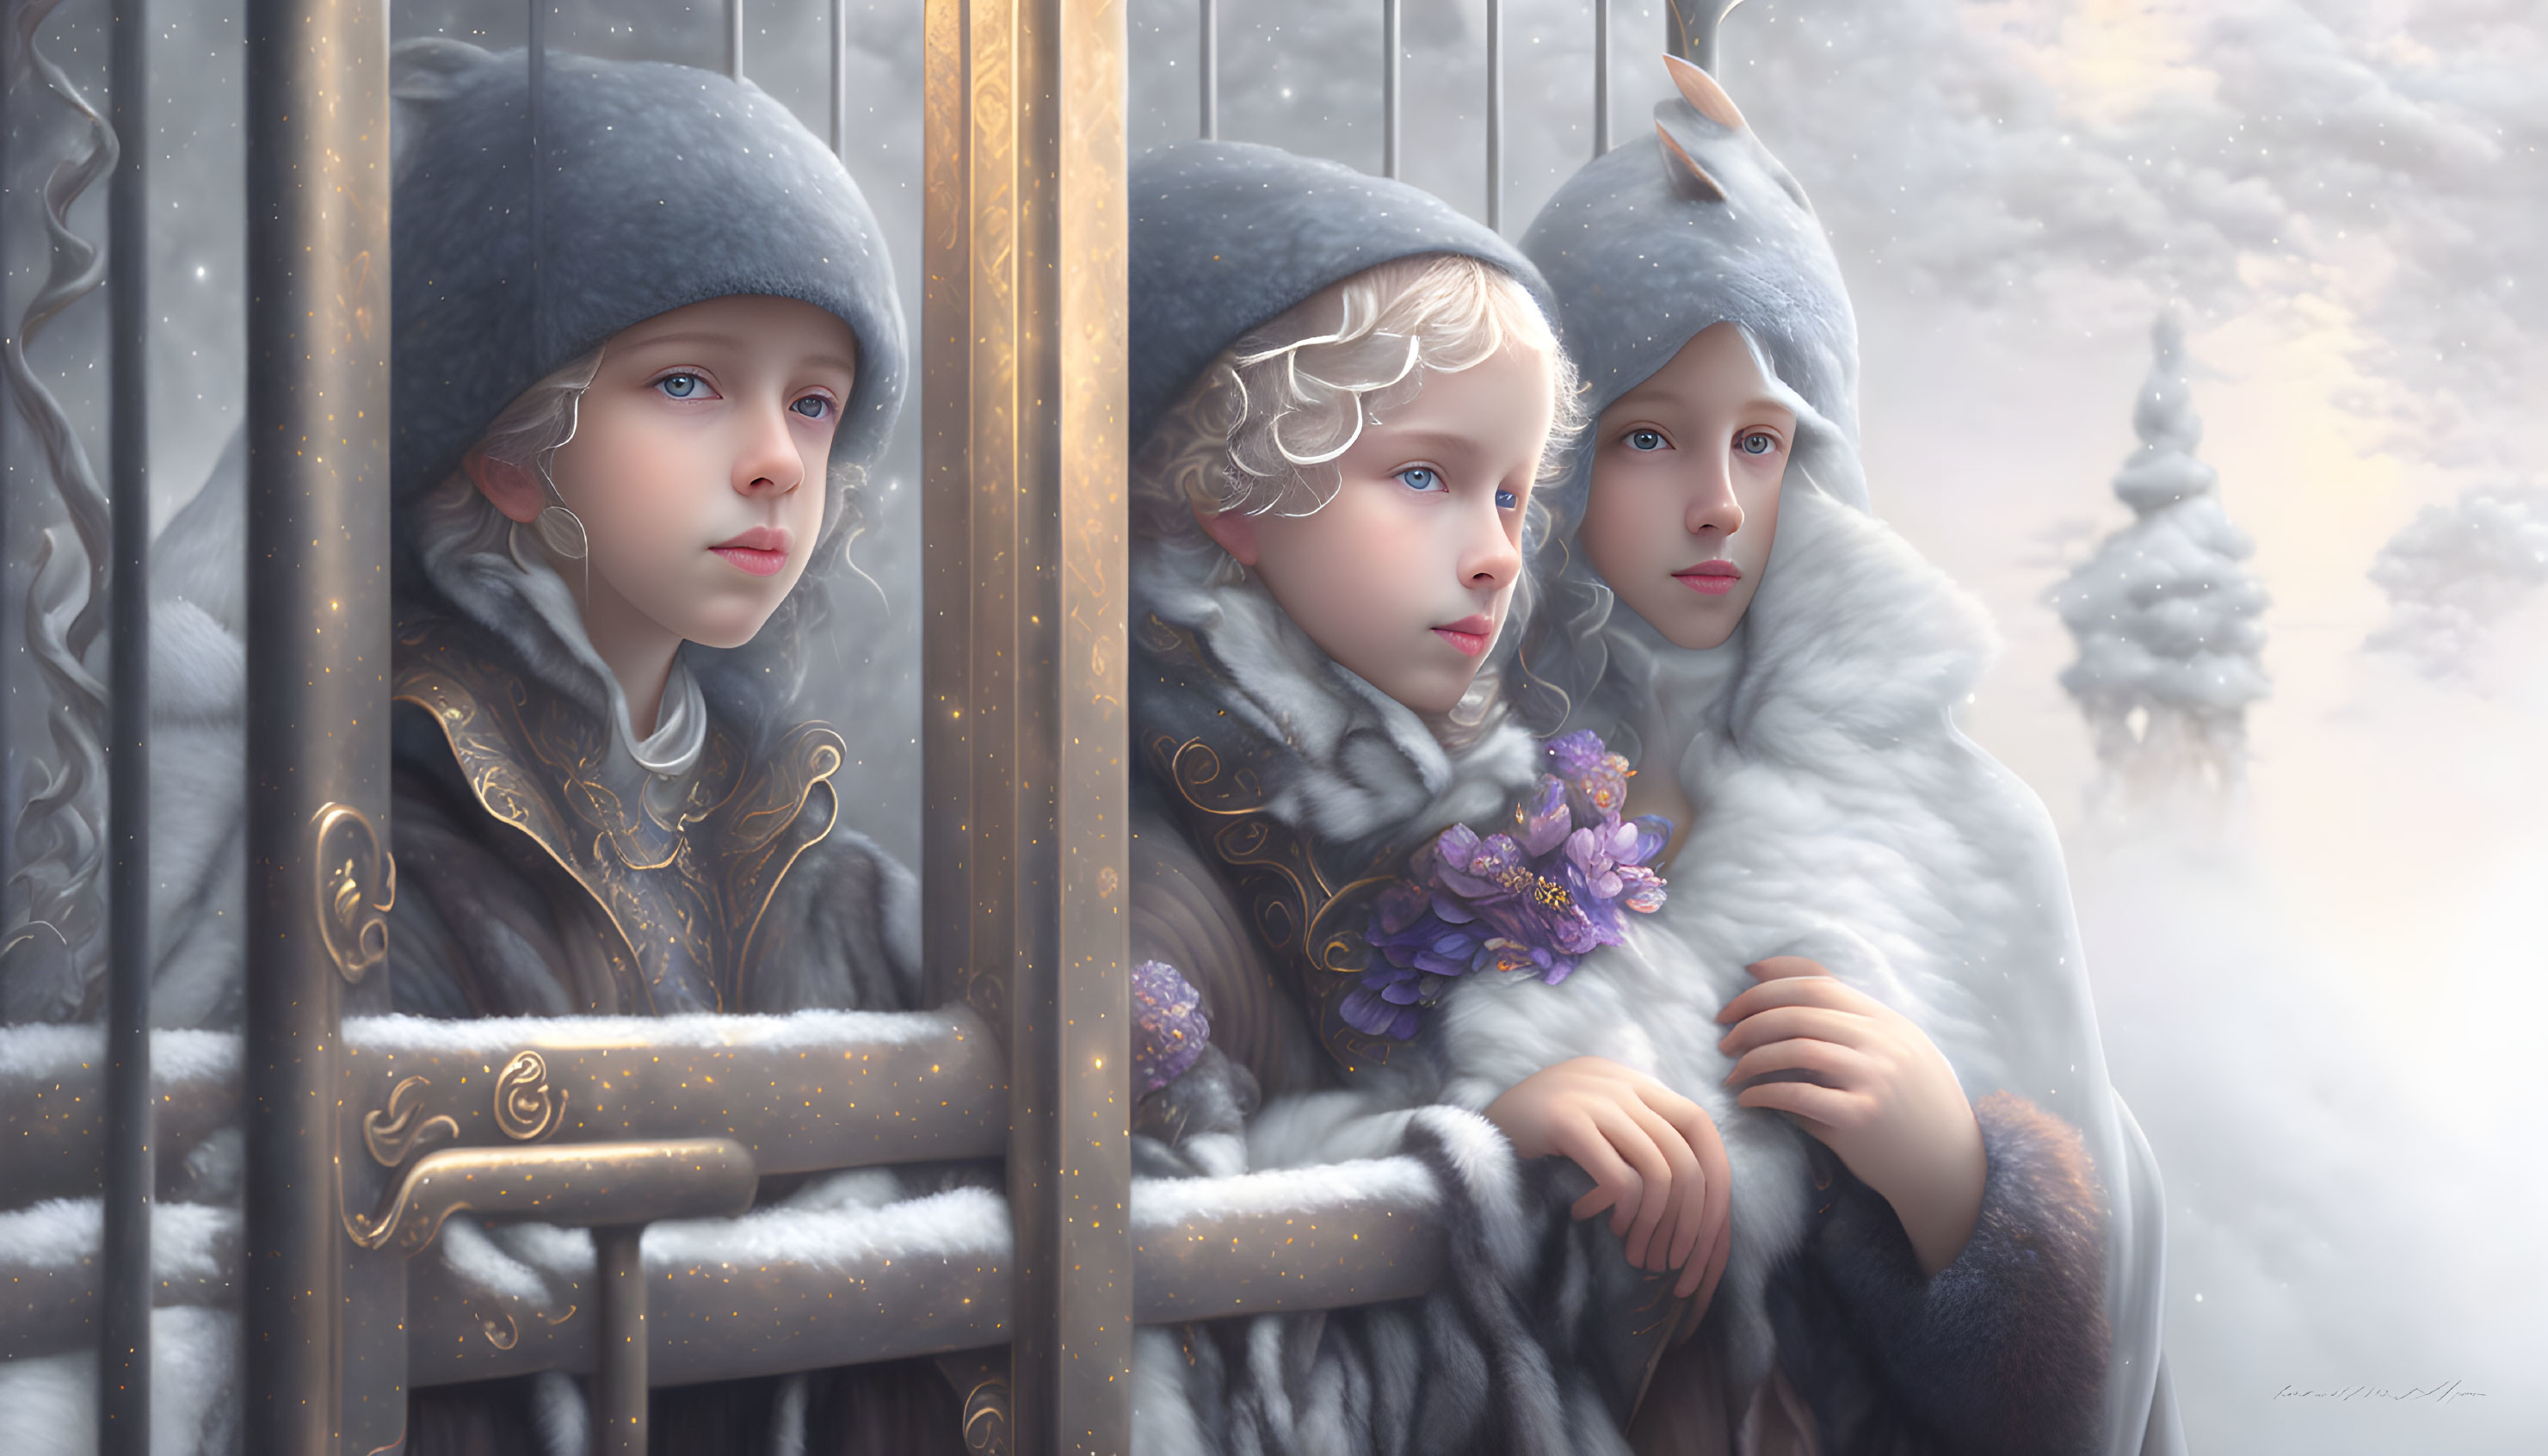 Children in winter clothing by ornate gate in snowy landscape